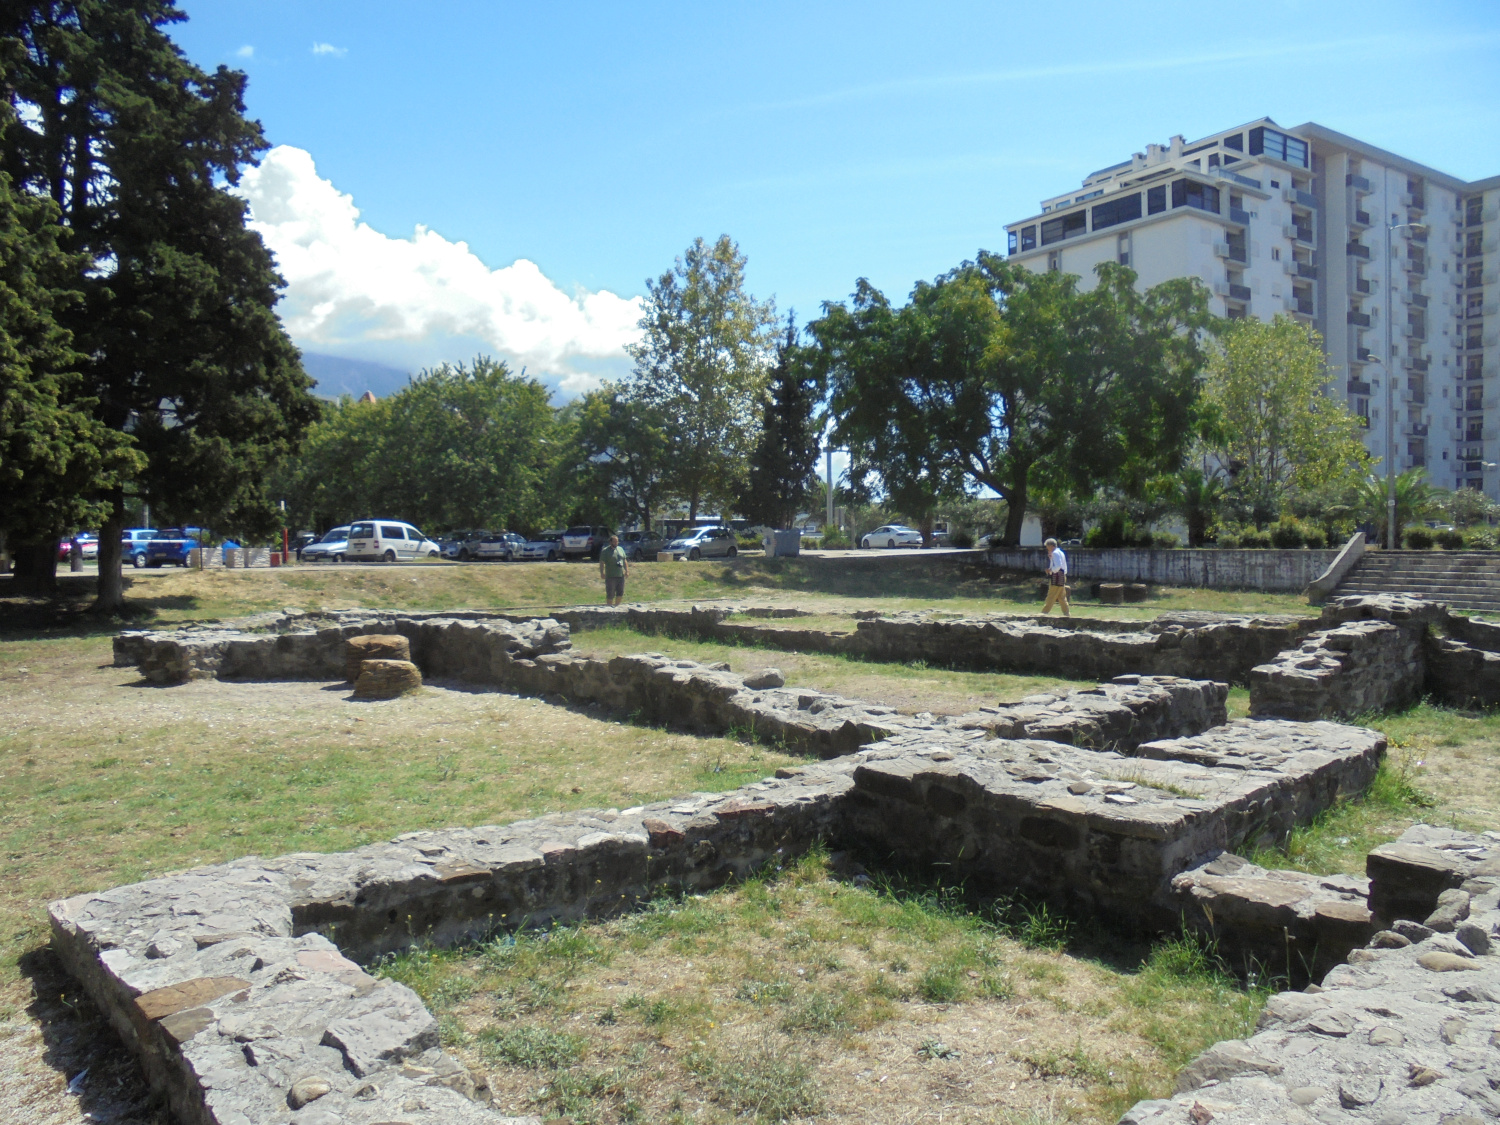 Documentation of an early Christian basilica in Bar, Montenegro